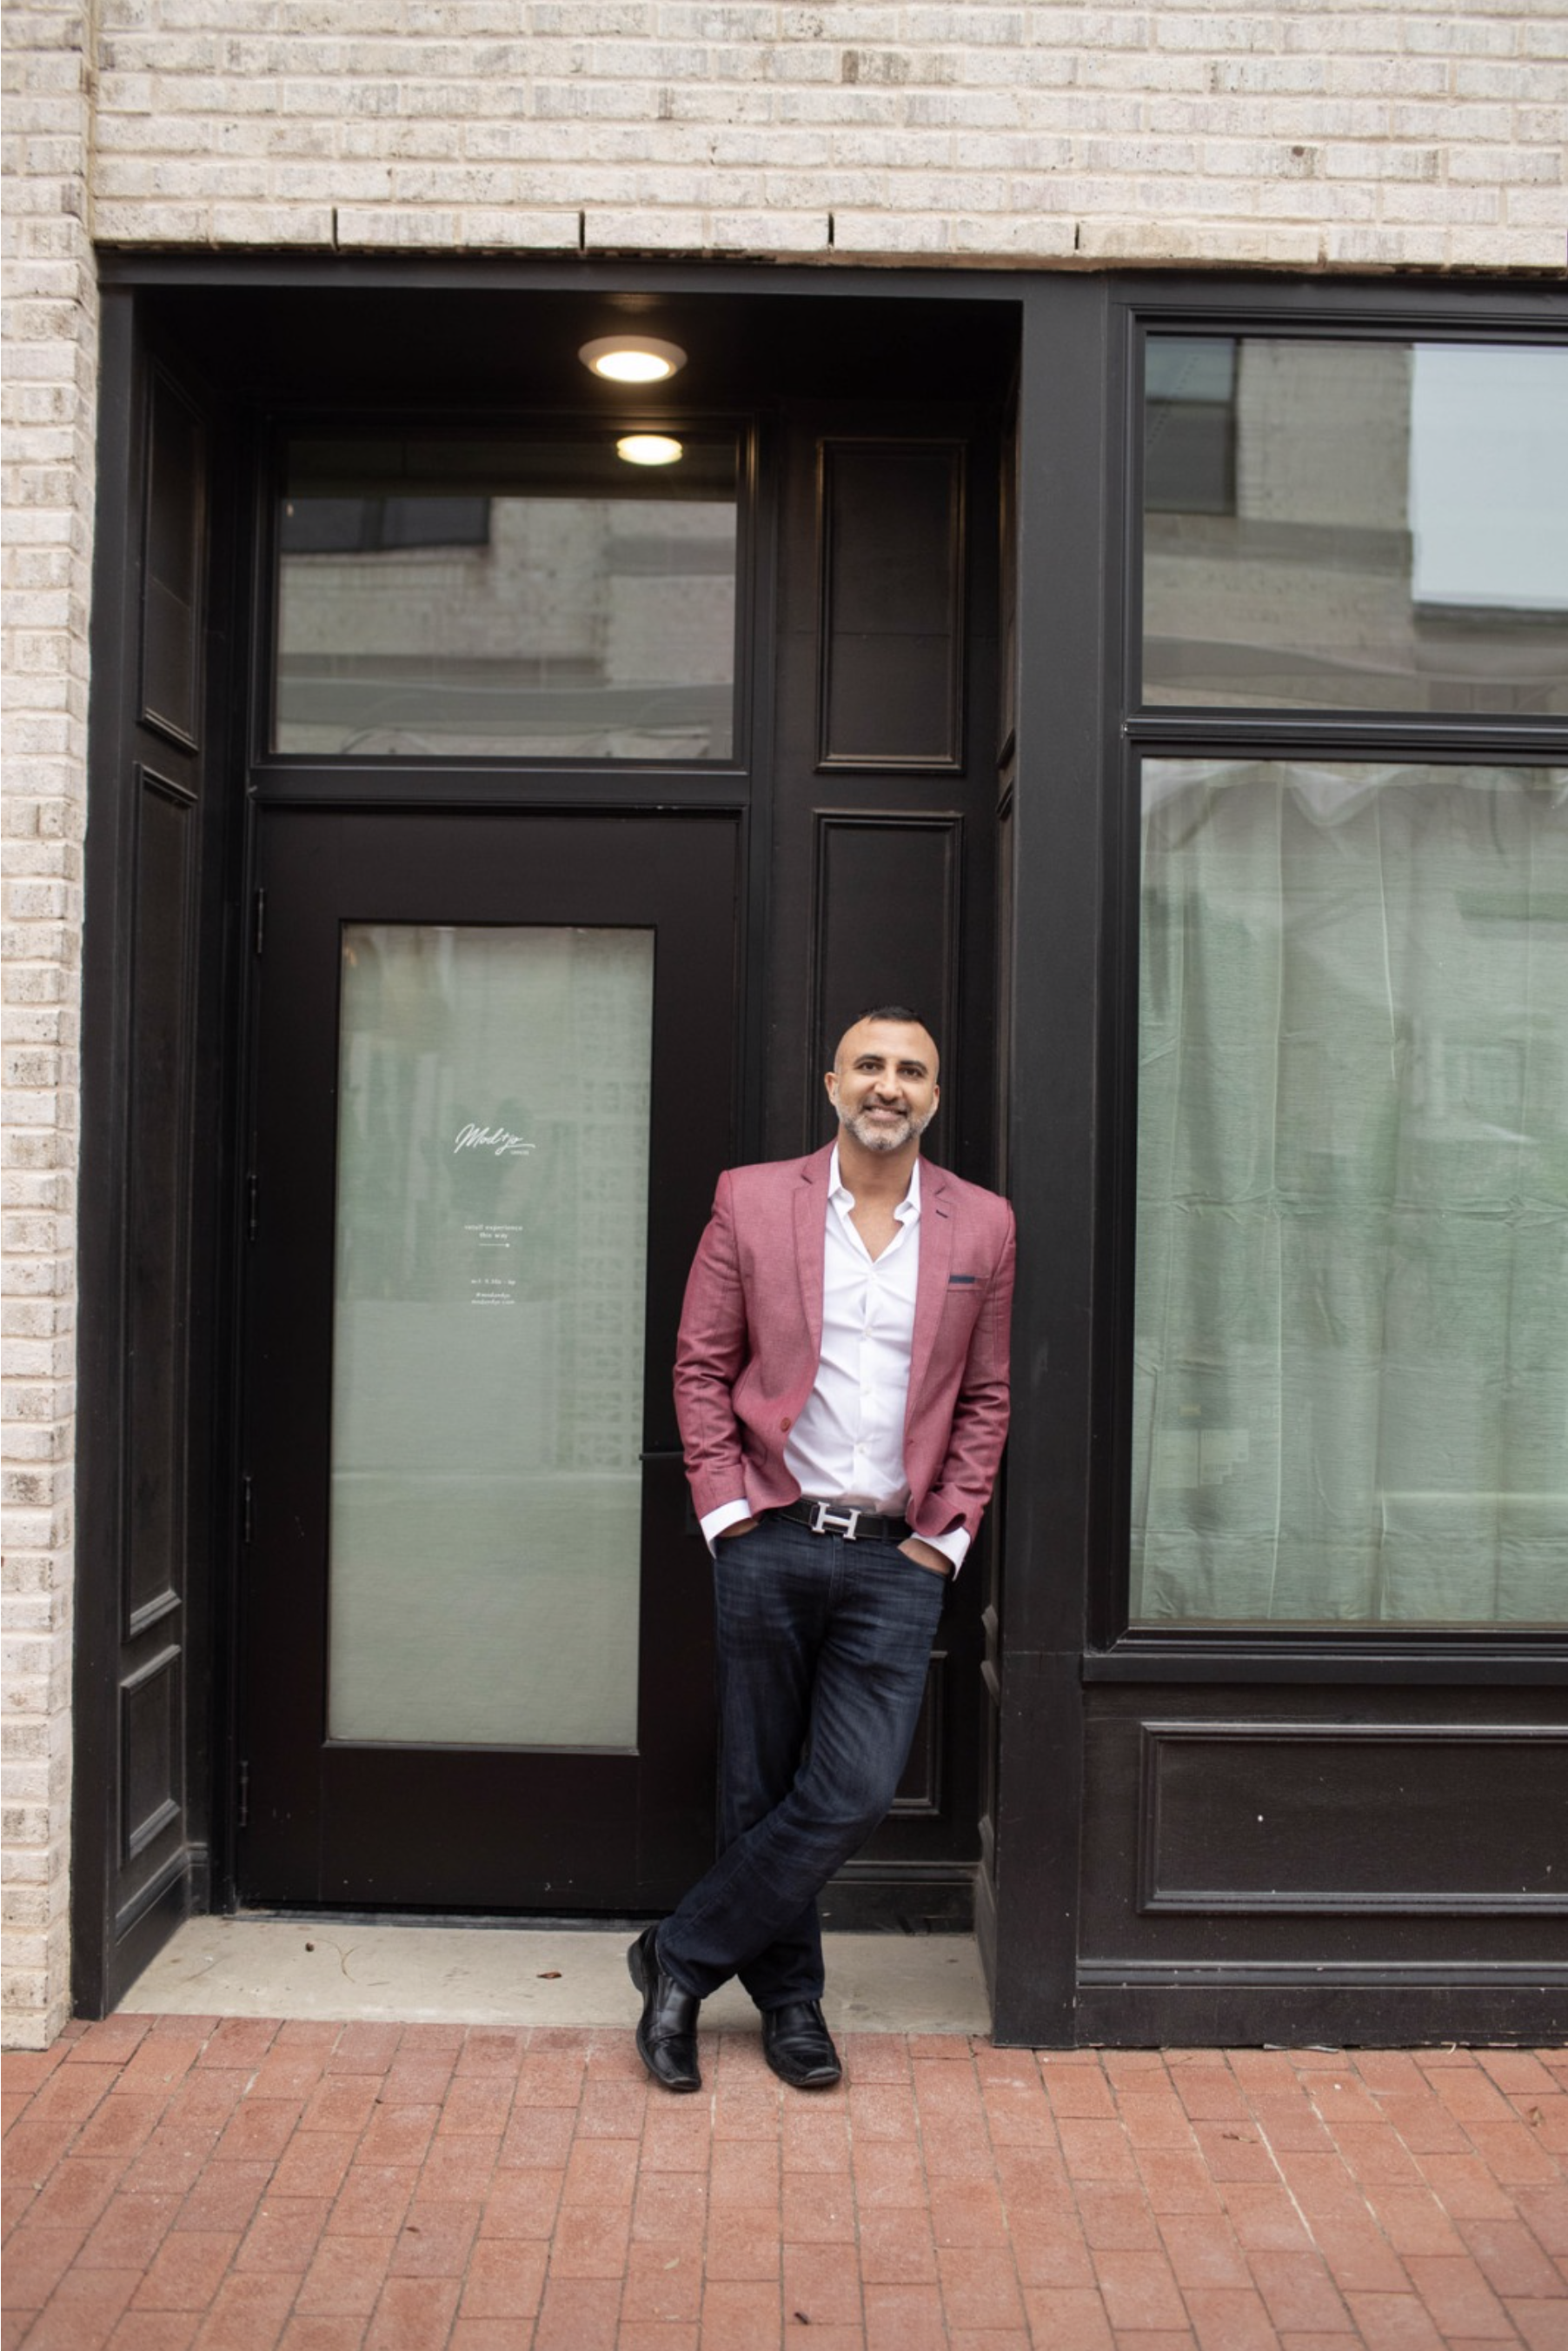 Charting a success story as an incredible serial entrepreneur and fund manager is Amir Baluch